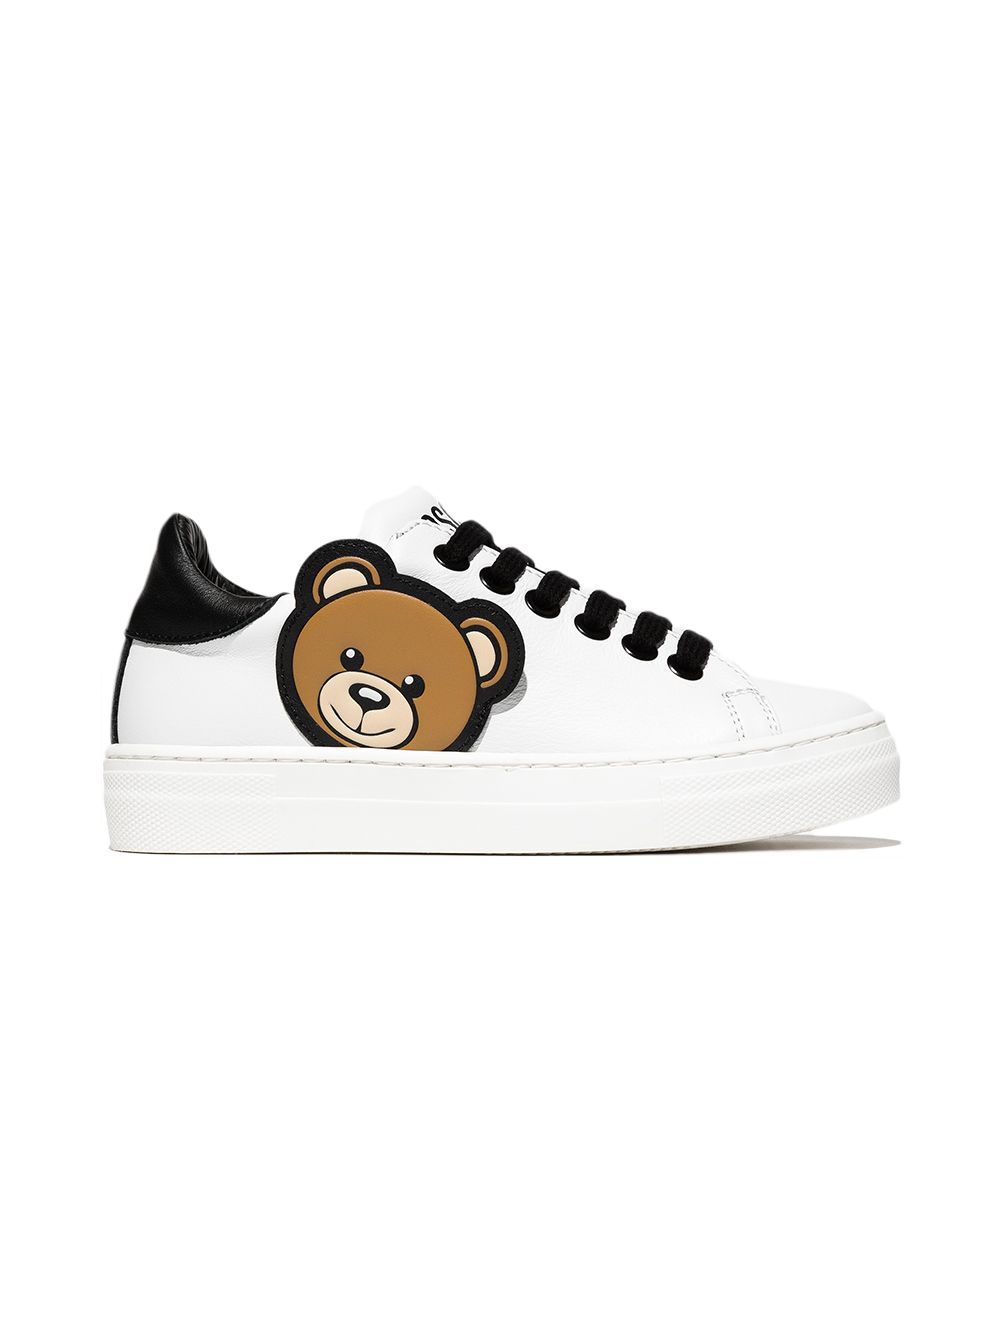 Moschino Teddy Bear Leather Trainers